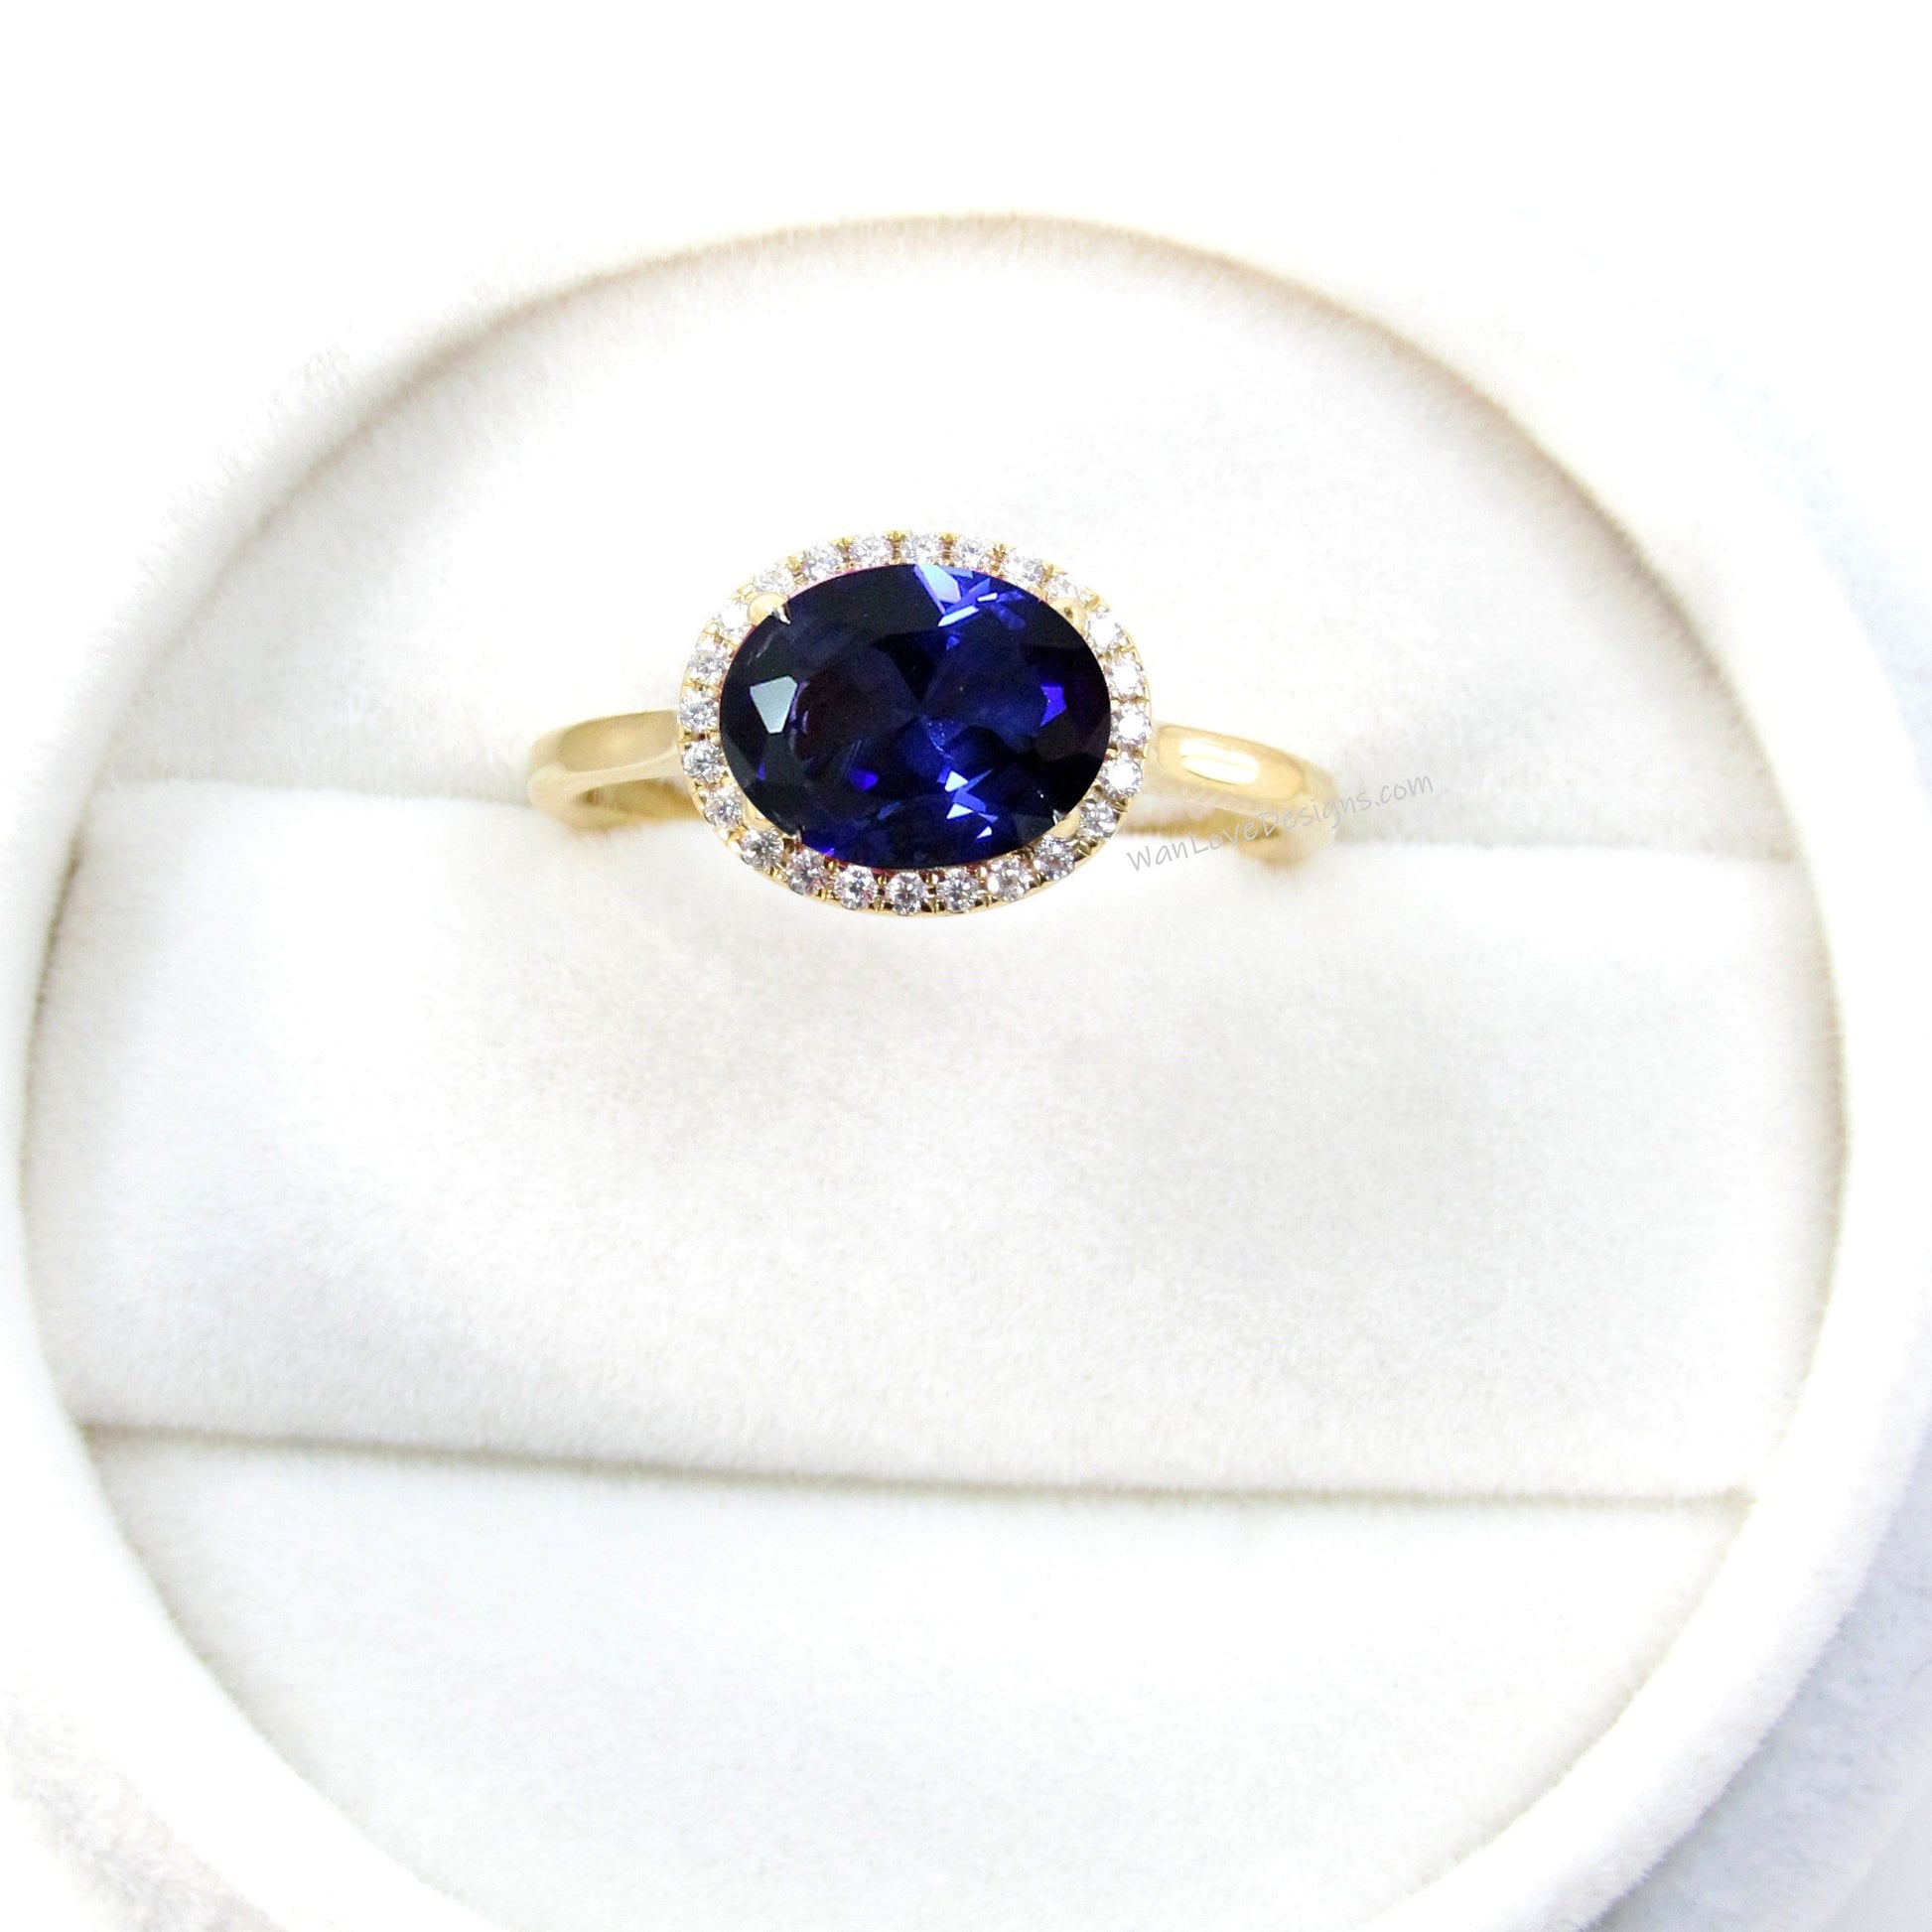 14K Solid Gold Ring /East West Oval Cut Blue Sapphire Diamond Center / Engagement Ring/Anniversary Ring/Promise ring/Halo White Gold Ring Wan Love Designs